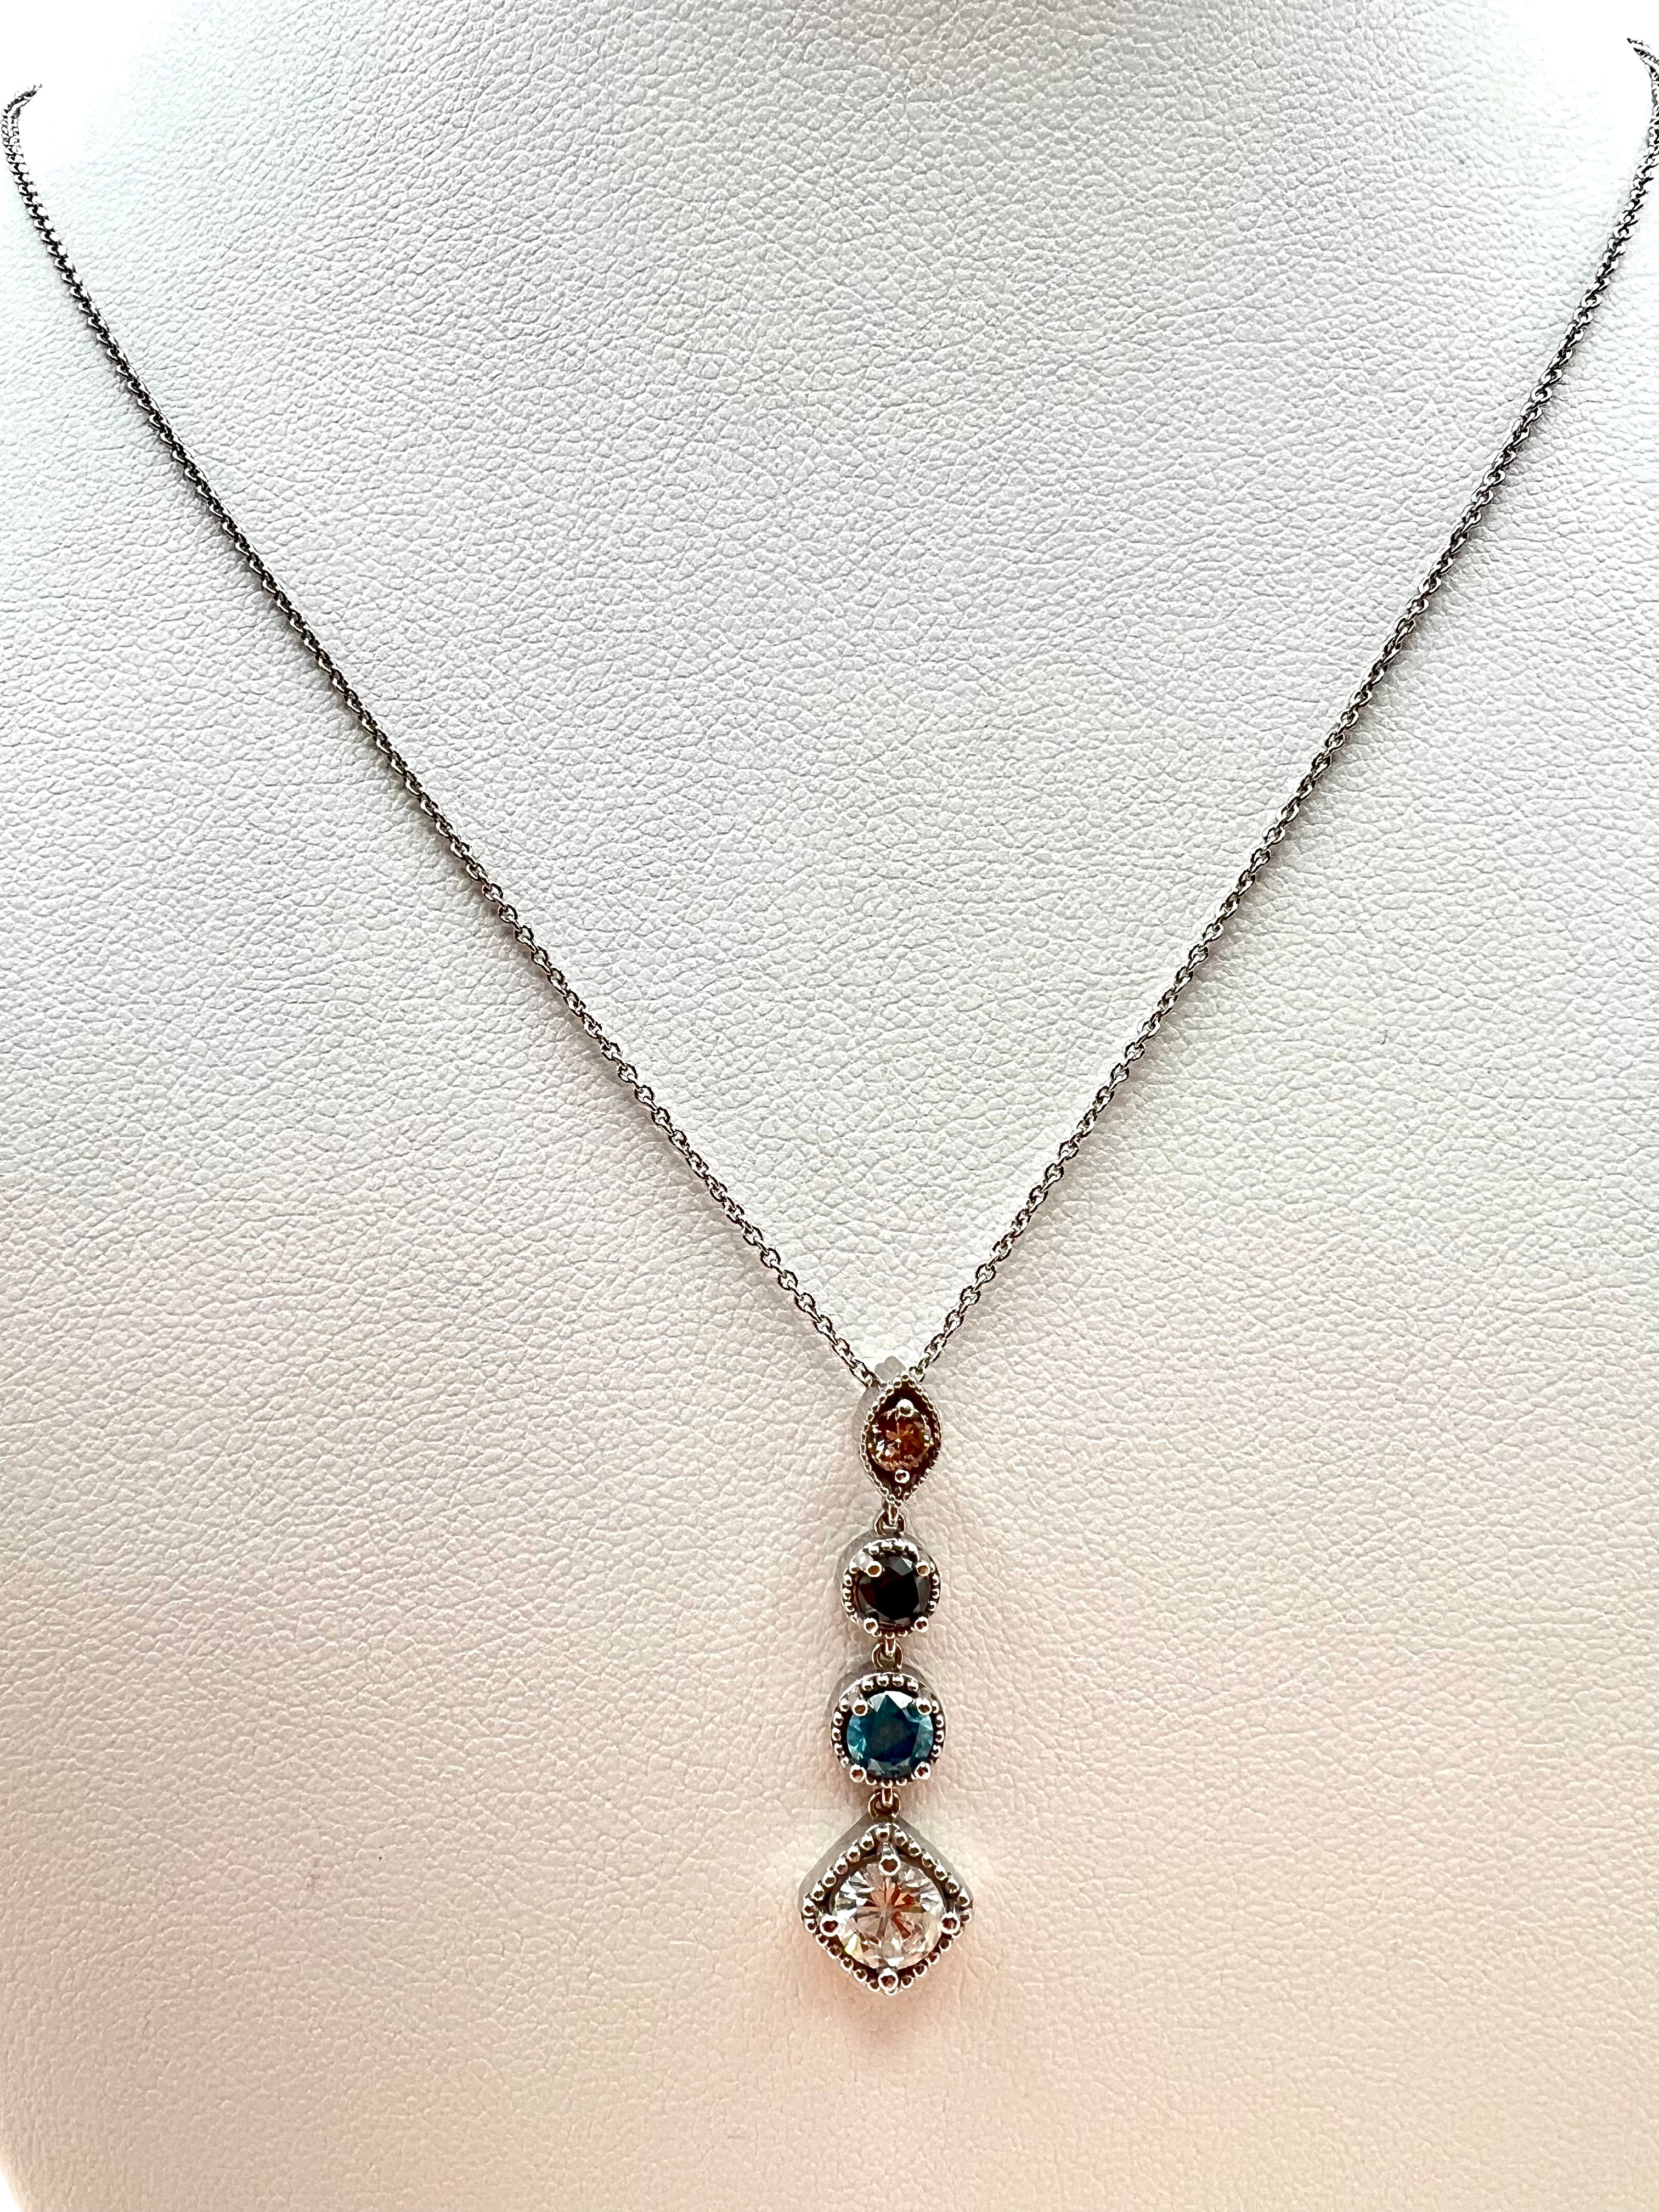 14k White Gold with four Colored Diamonds - Le Vive Jewelry in Riverside